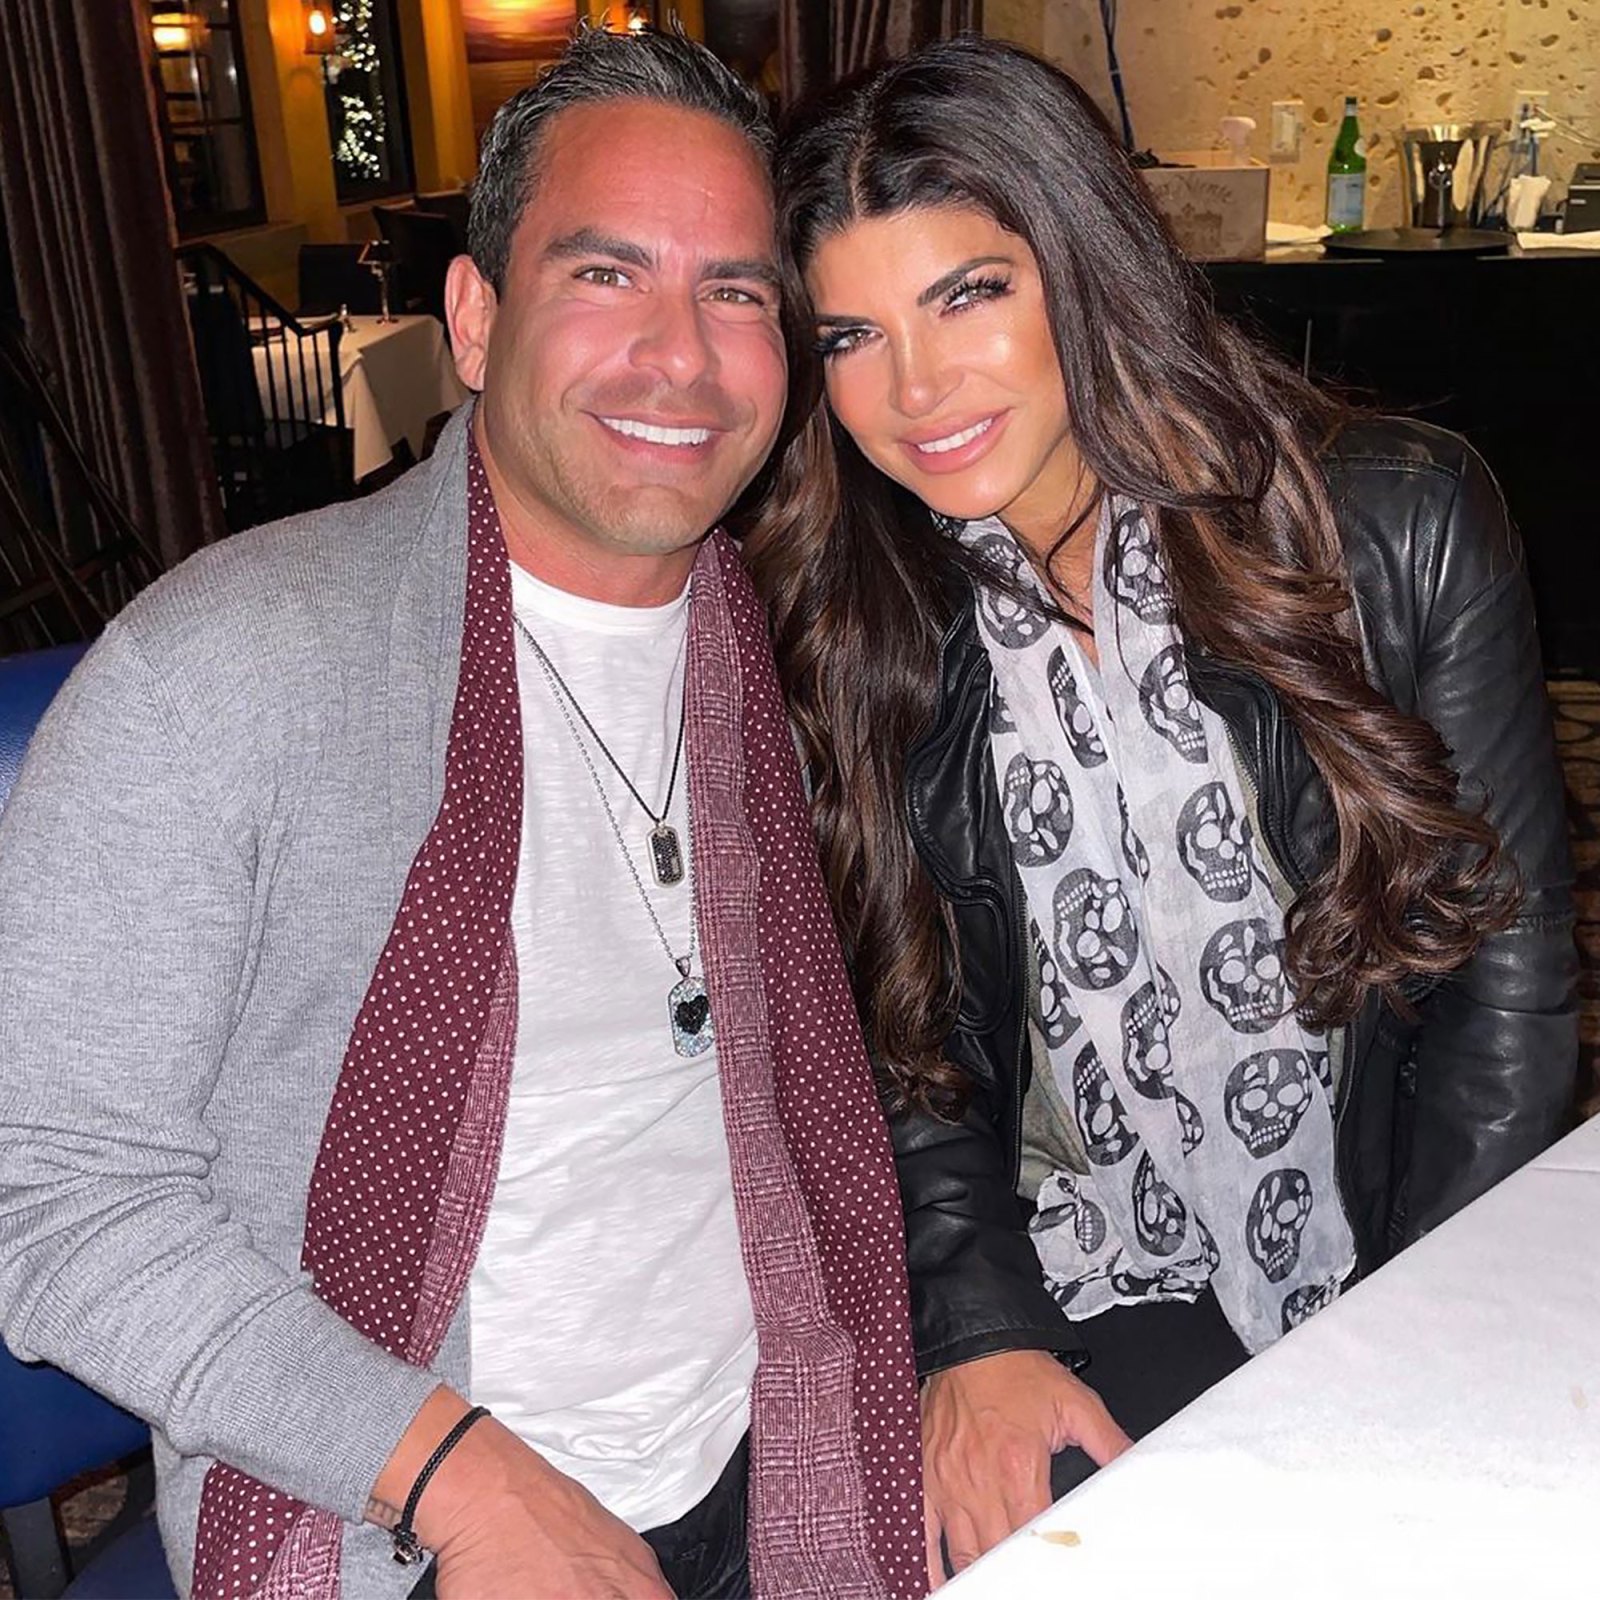 Real Housewives of New Jersey' Star Teresa Giudice Is Engaged to Boyfriend Luis Ruelas